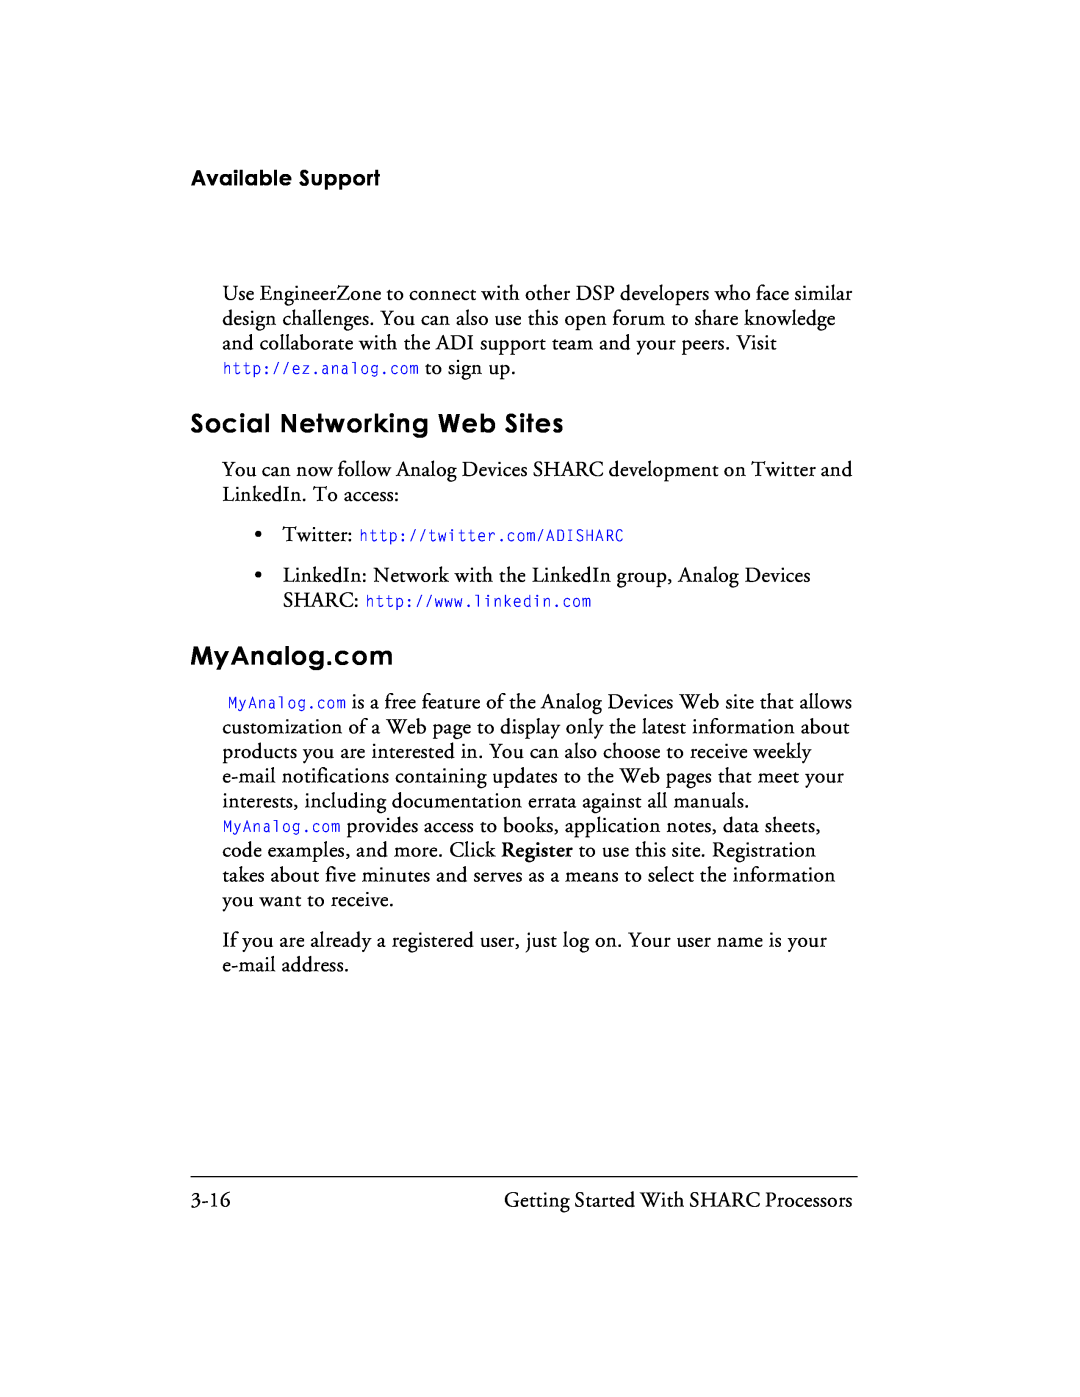 Analog Devices 82-003536-01 manual Social Networking Web Sites, Available Support 